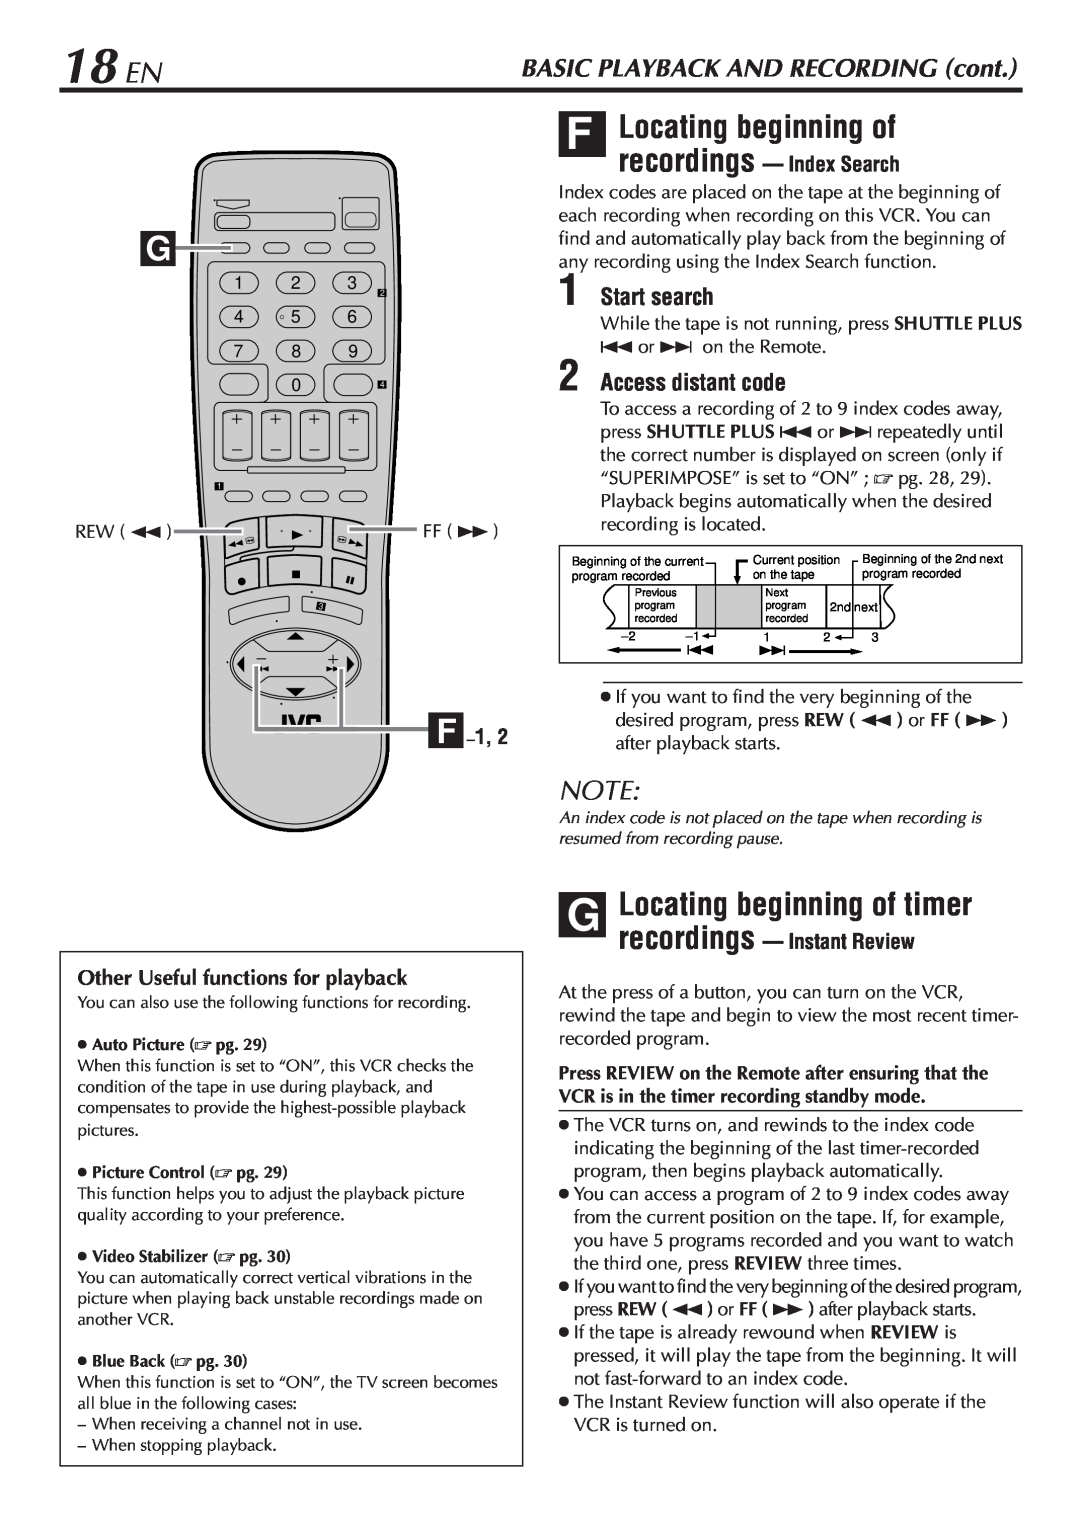 JVC HR-A47U manual 18 EN, F Locating beginning of, G Locating beginning of timer, Start search, Access distant code 